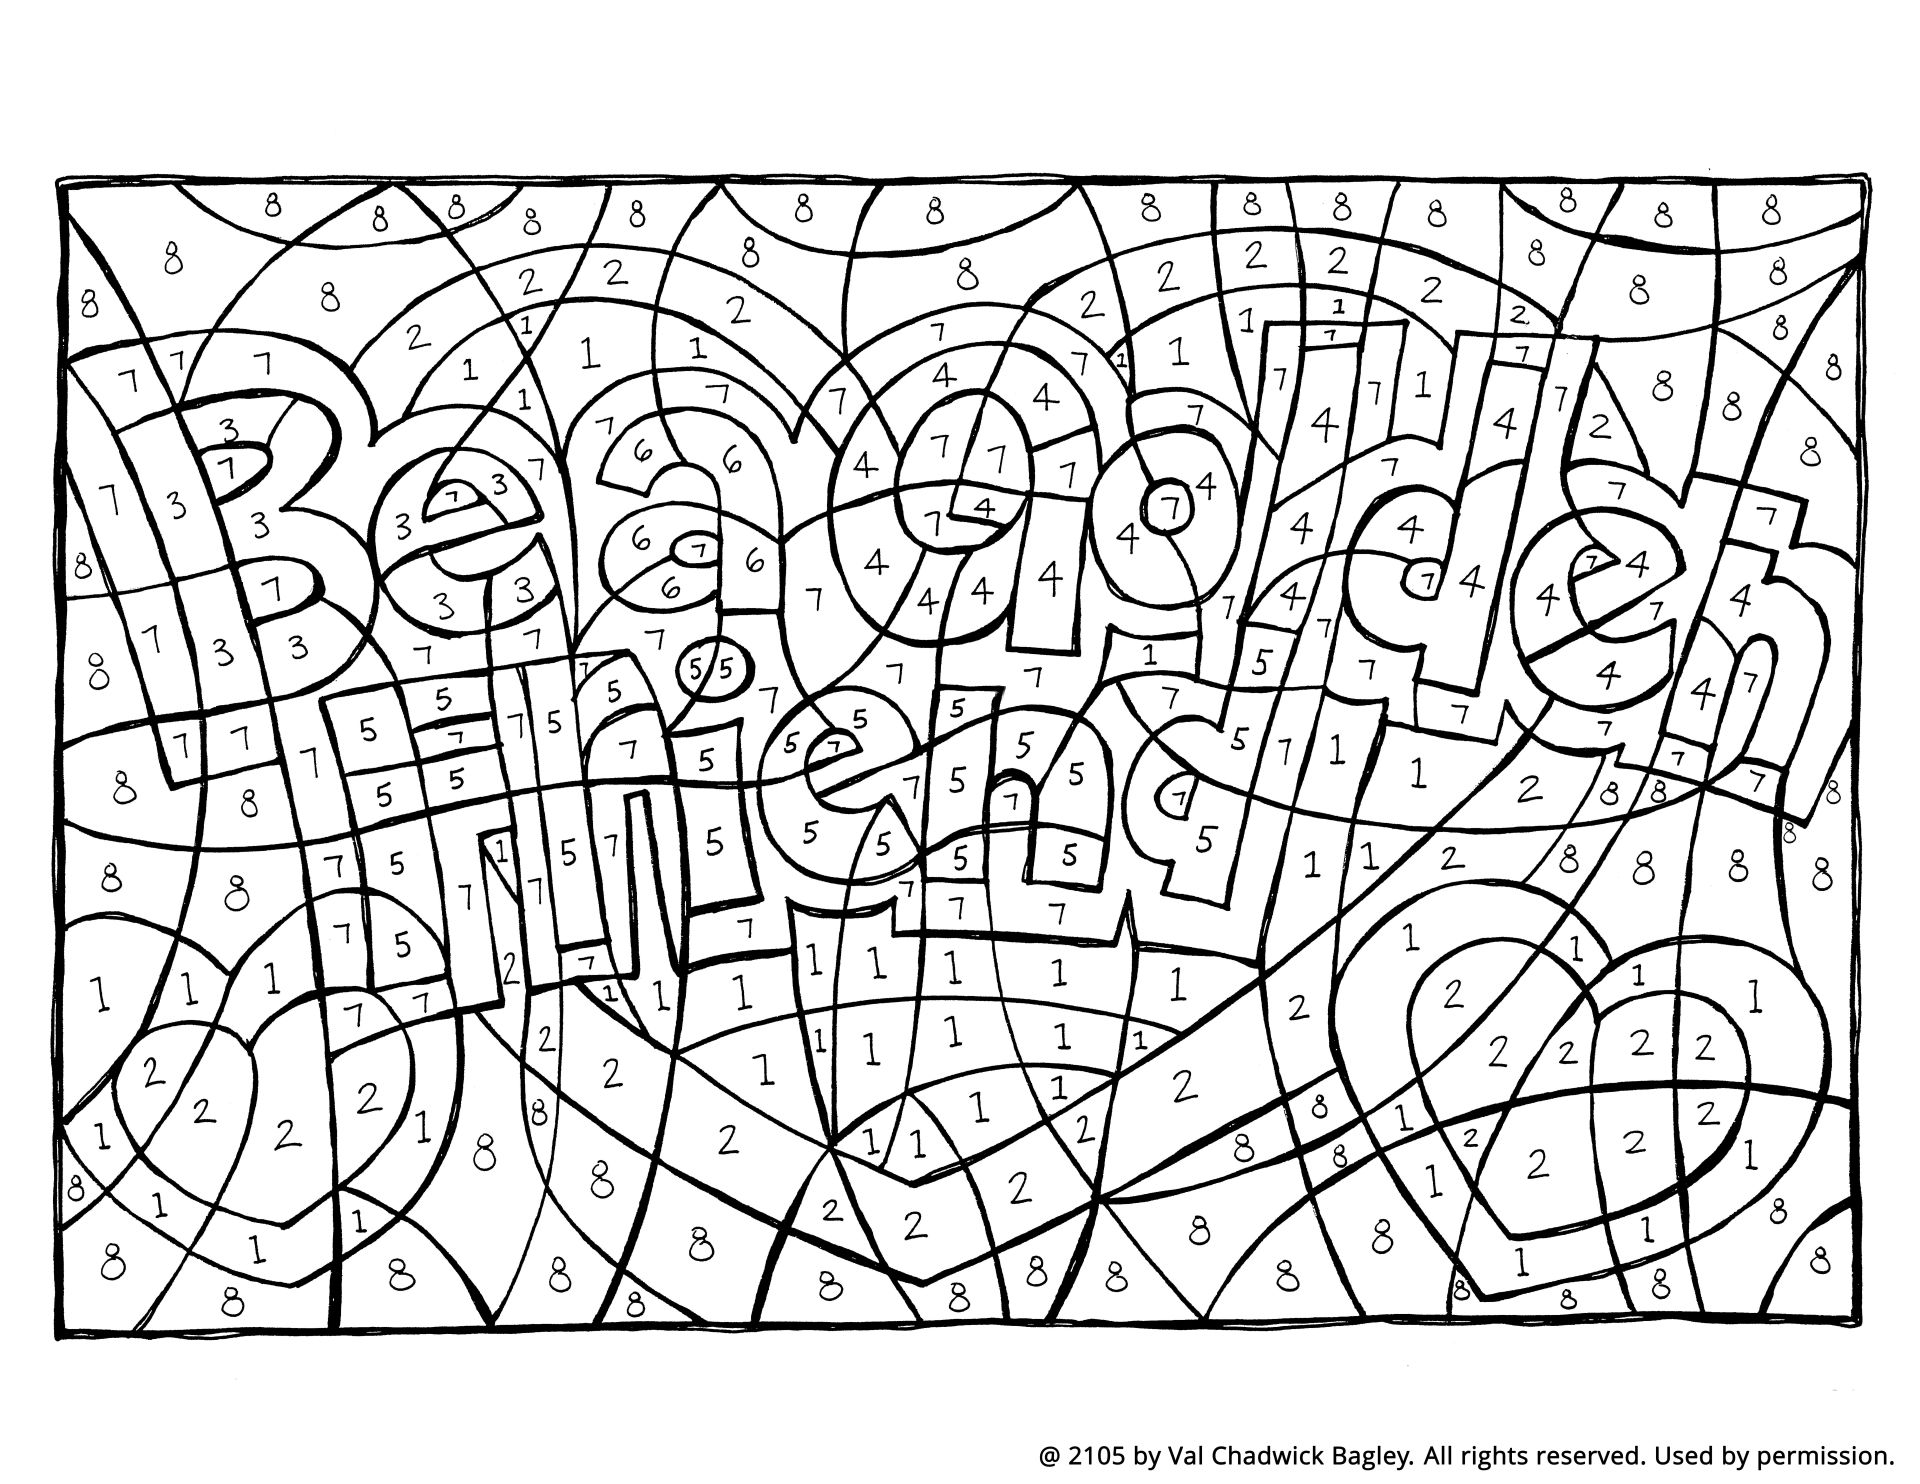 hidden images coloring pages